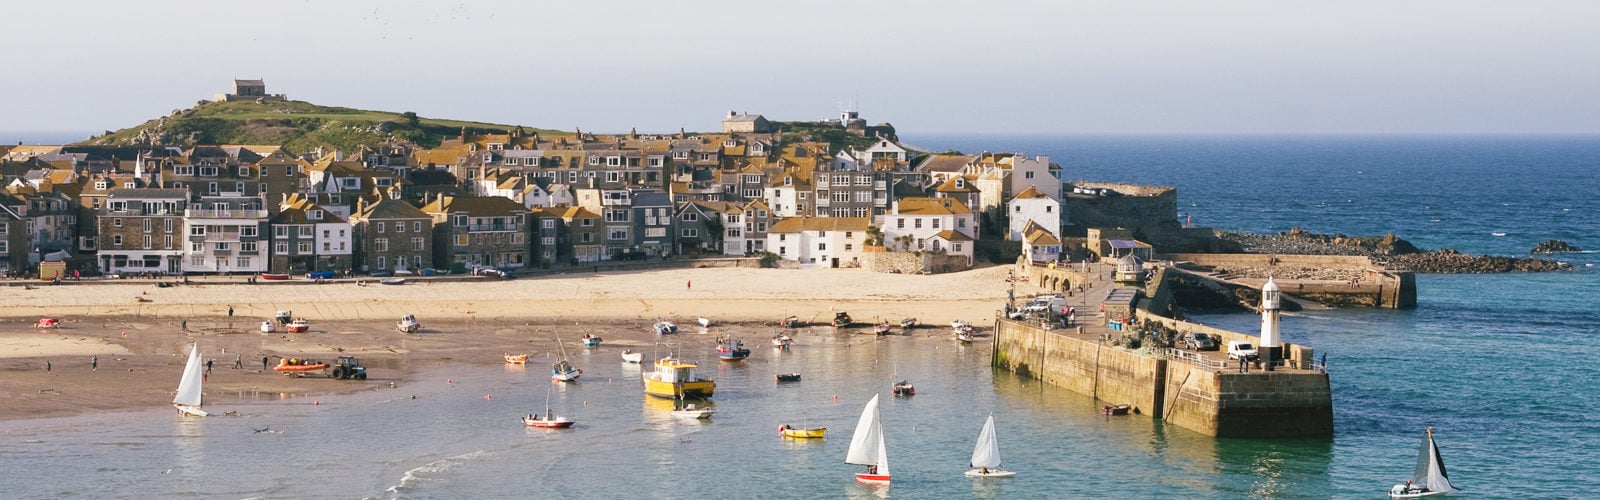 St Ives in Cornwall, England.